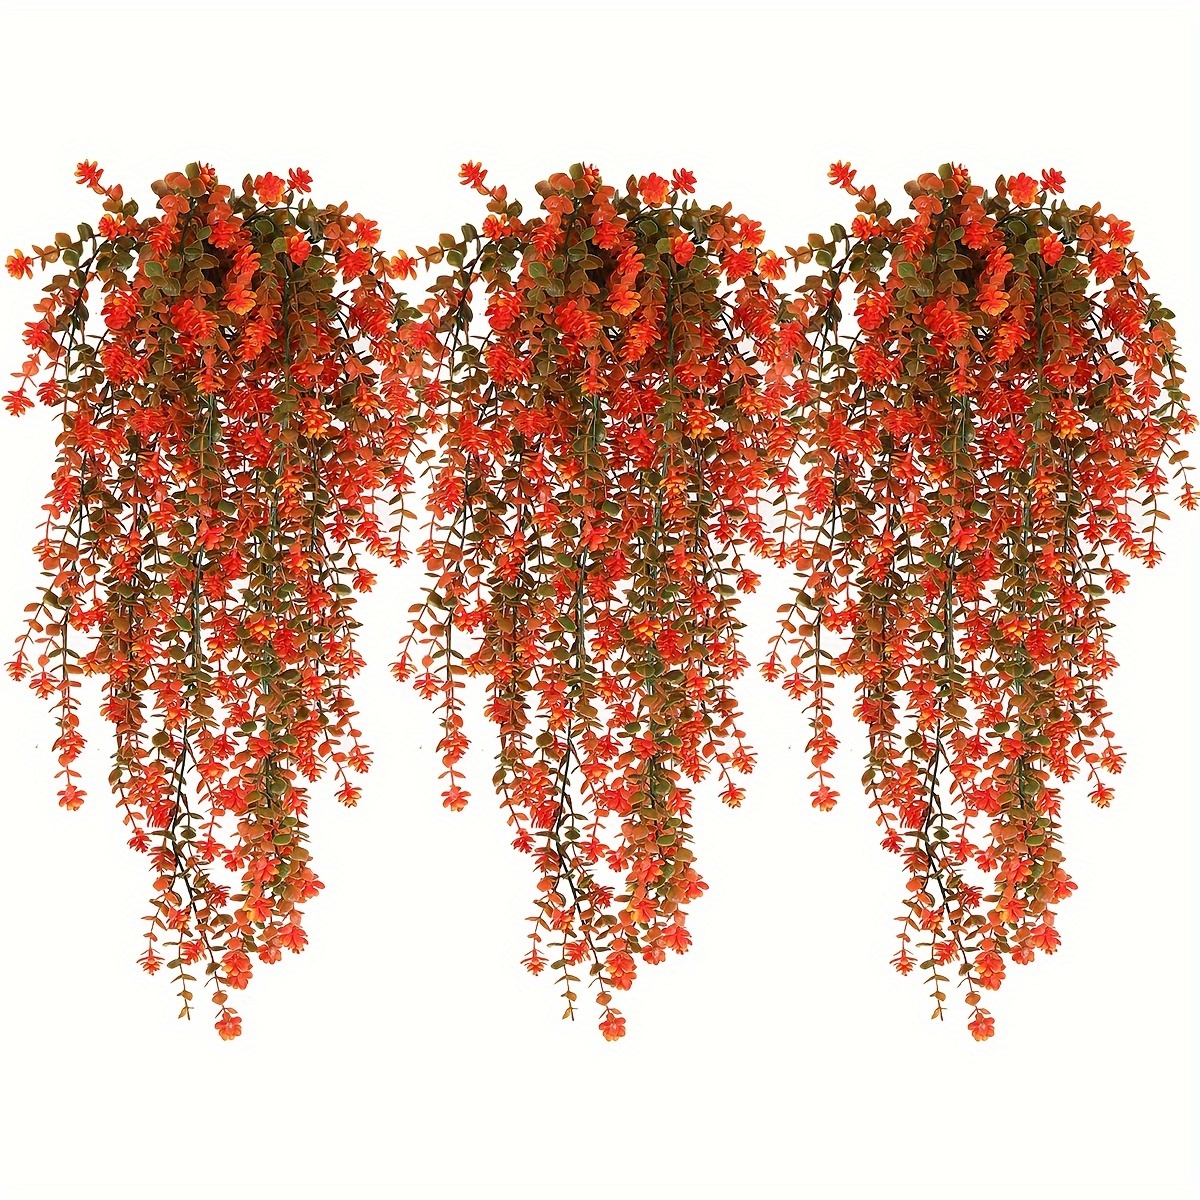 

3-piece Uv Resistant Artificial Hanging Plants - Vibrant Faux Fall Flowers For Indoor & Outdoor Decor, Perfect For Home, Garden, Parties & Thanksgiving